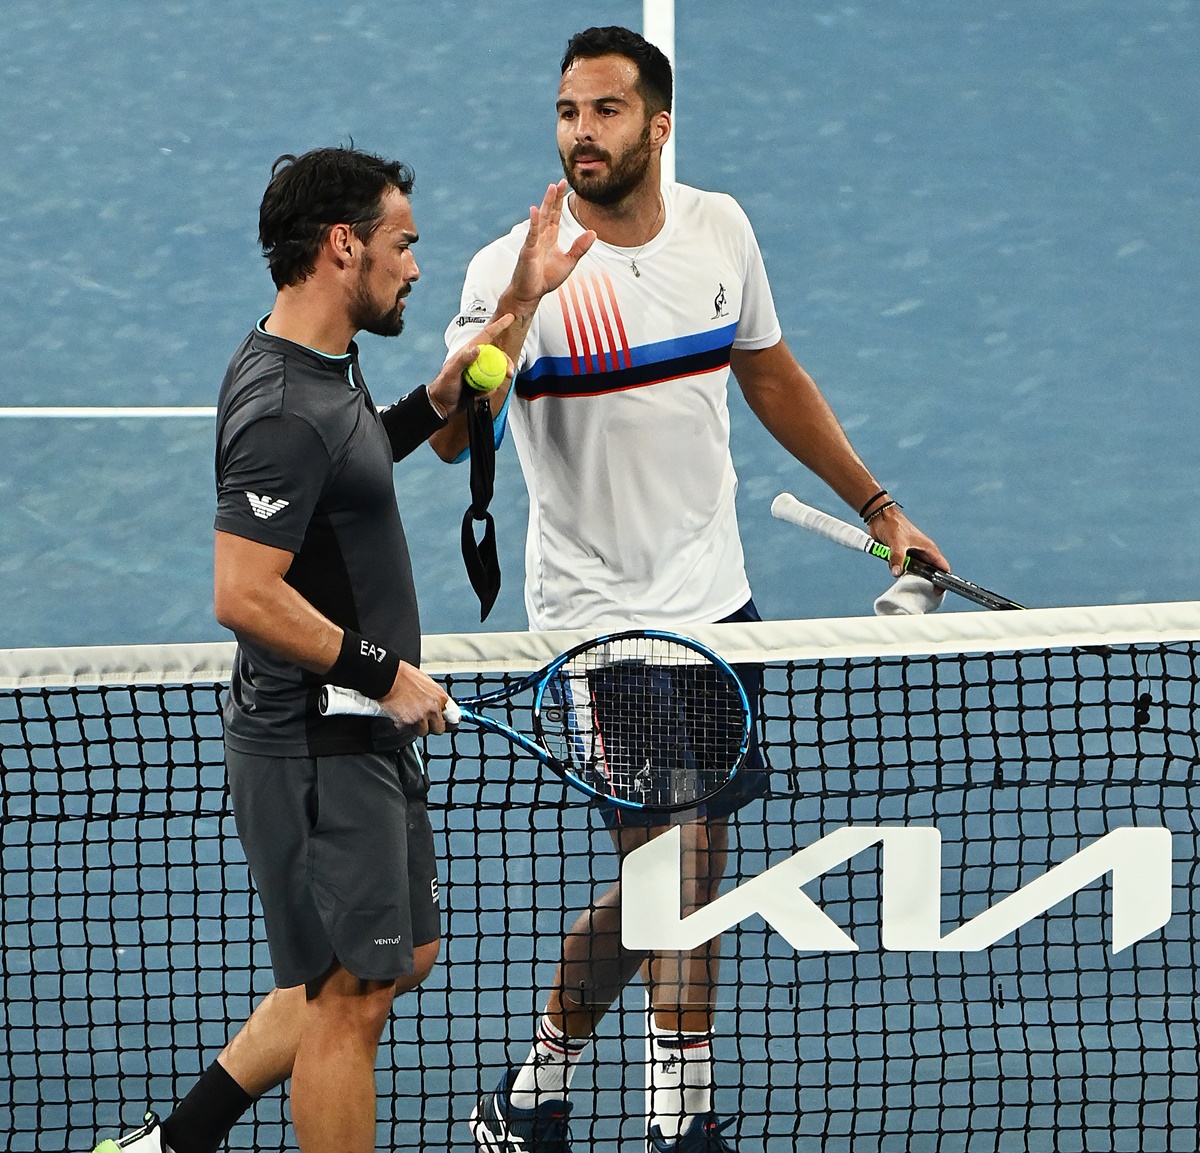 Italy's Fabio Fognini and Salvatore Caruso exchange words following their men's singles second round match on Day 4 of the Australian Open